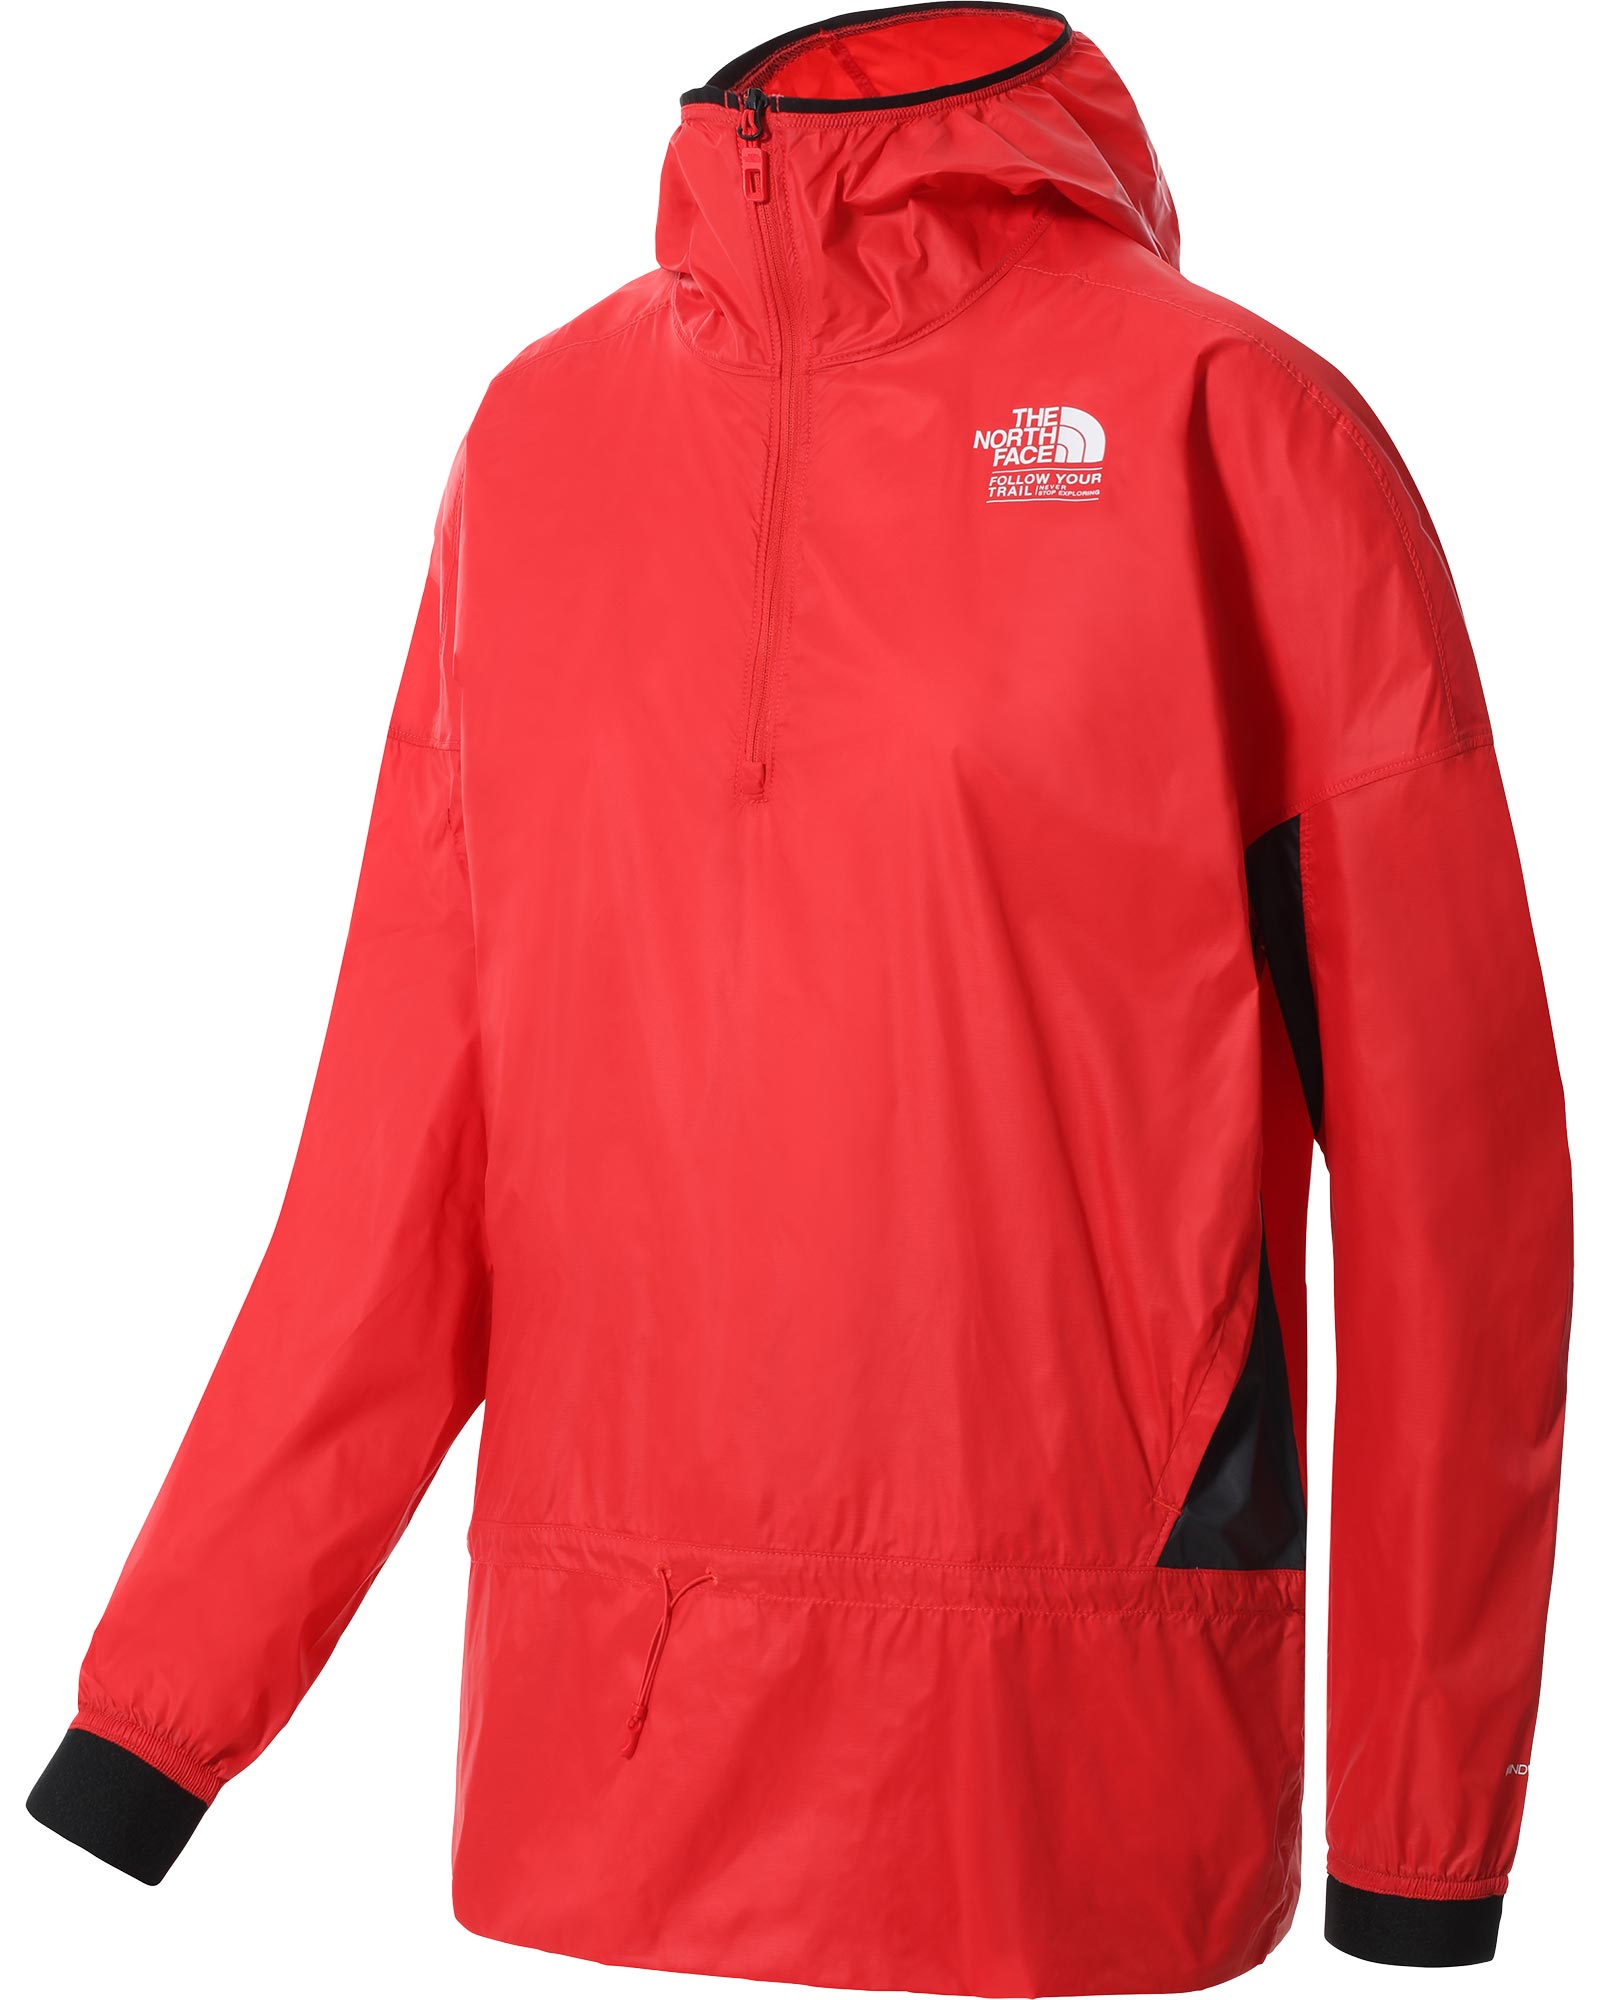 The North Face AO Women’s Wind Jacket - Horizon Red S